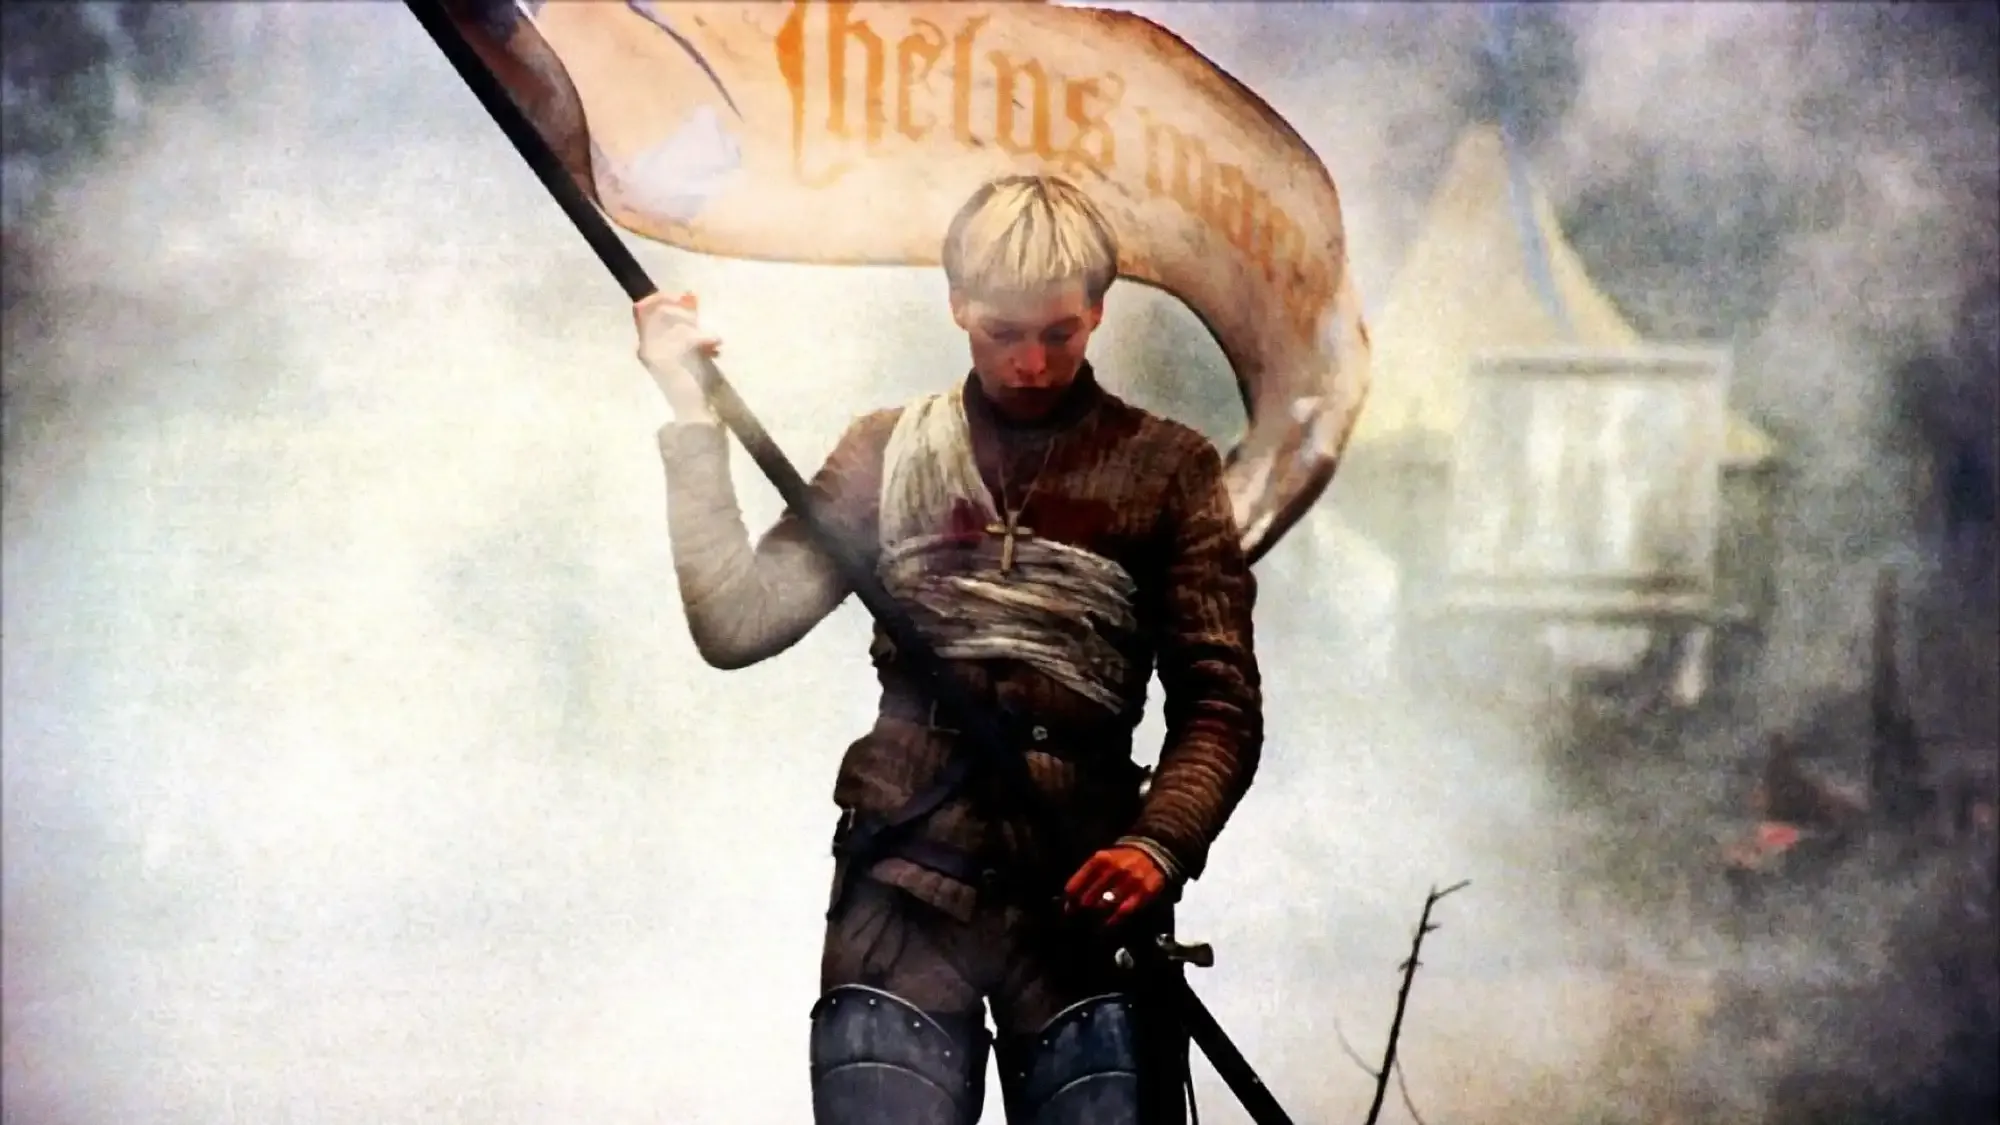 The Messenger: The Story of Joan of Arc movie review